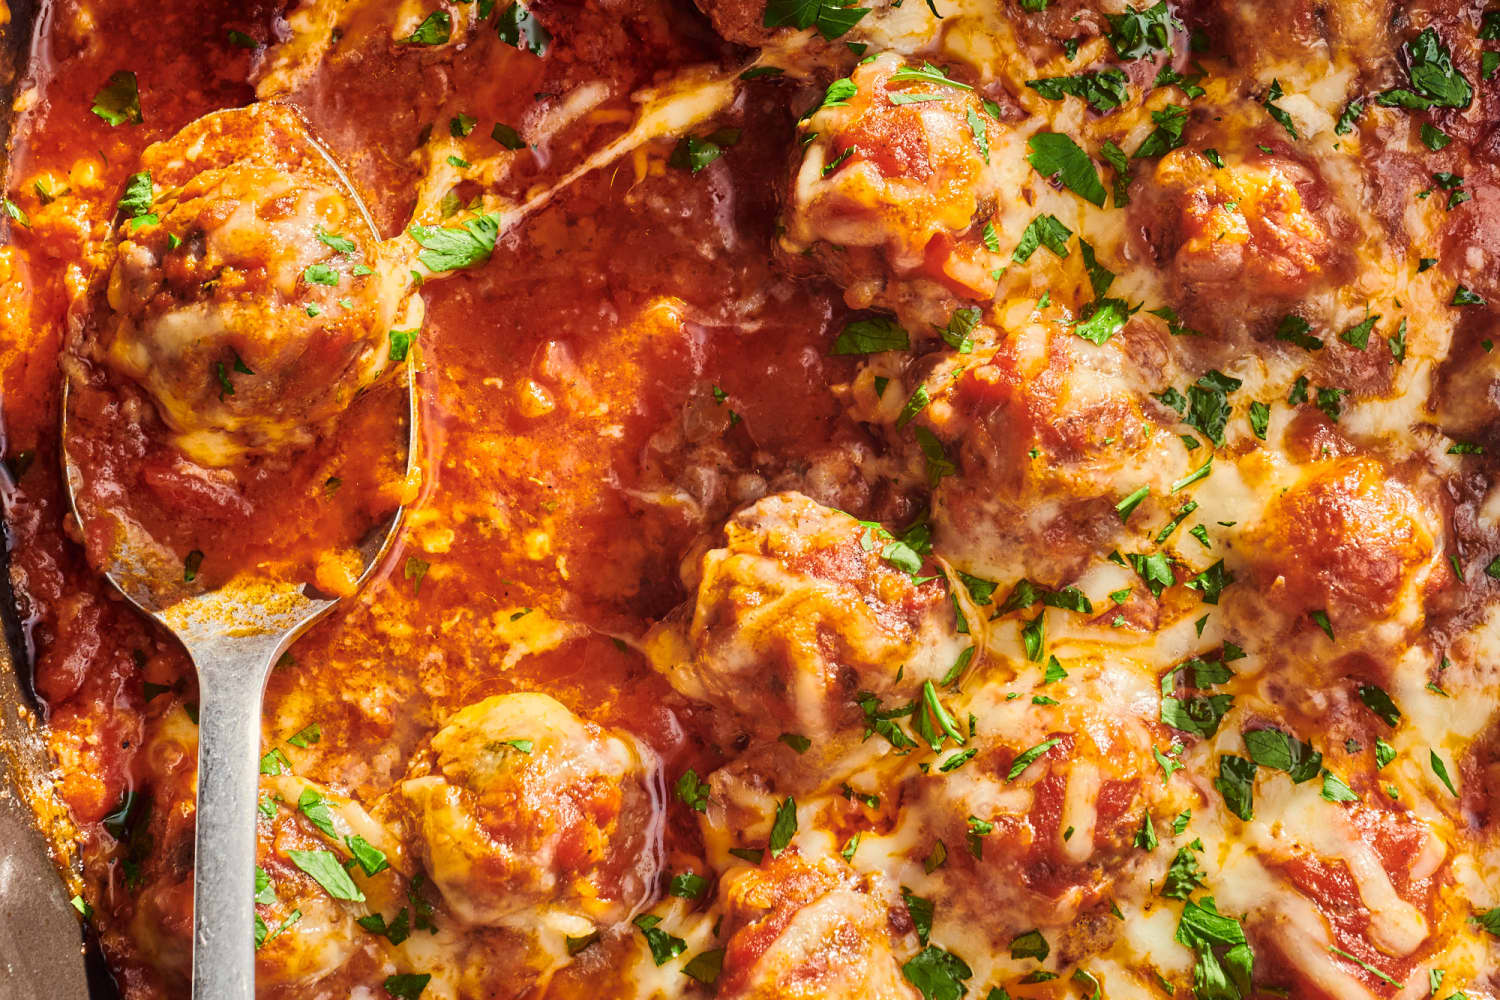 Cheesy Meatball Casserole Recipe (Without Pasta) | The Kitchn